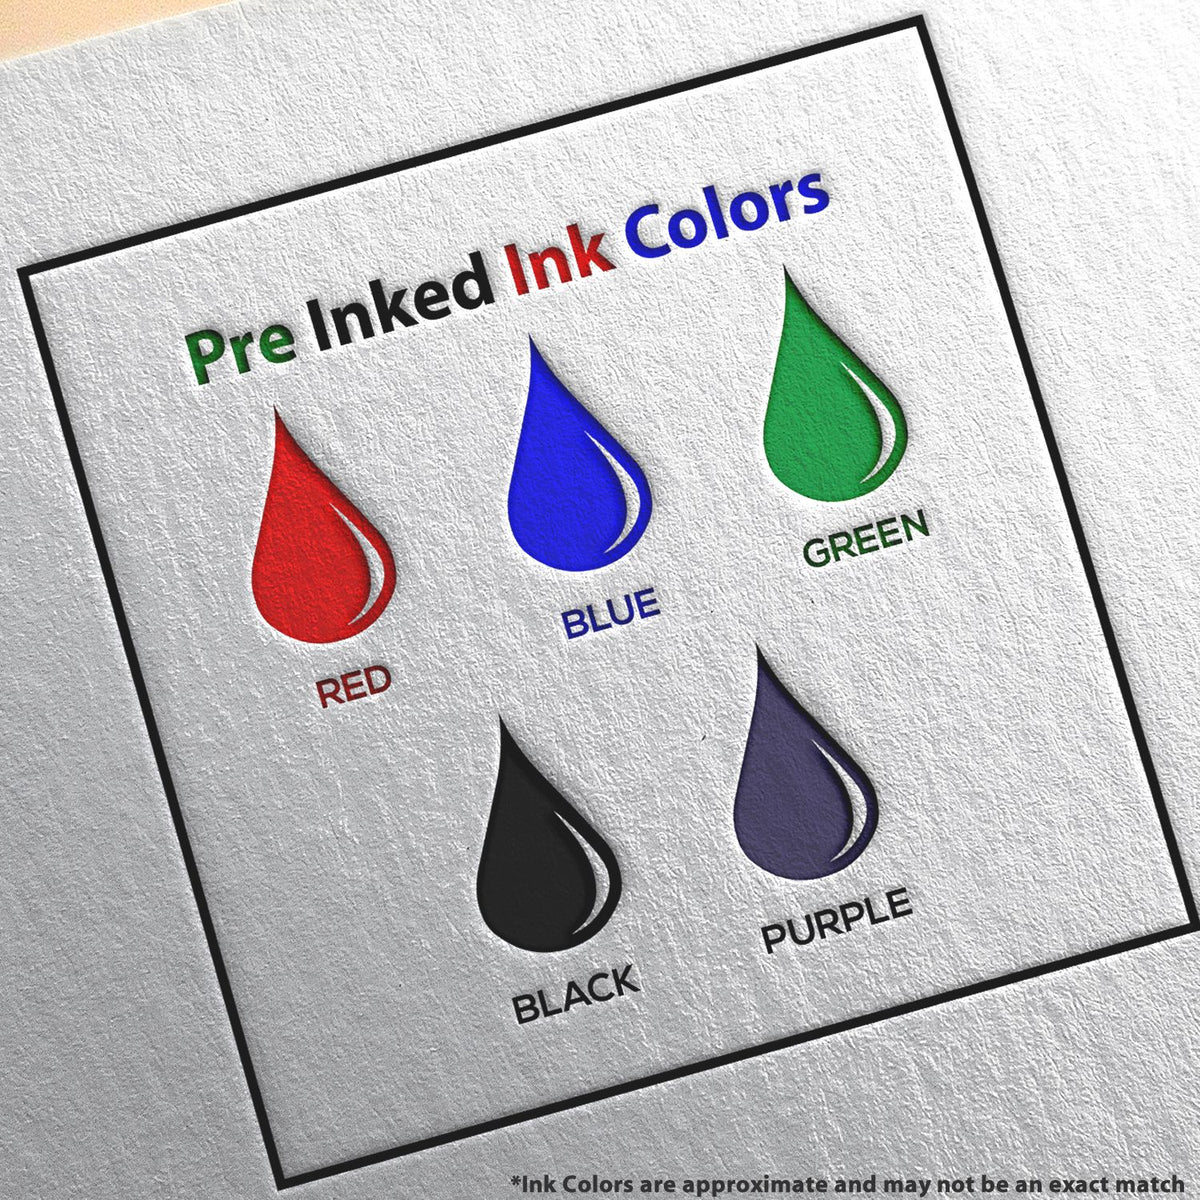 A picture showing the different ink colors or hues available for the Slim Pre-Inked Delaware Land Surveyor Seal Stamp product.